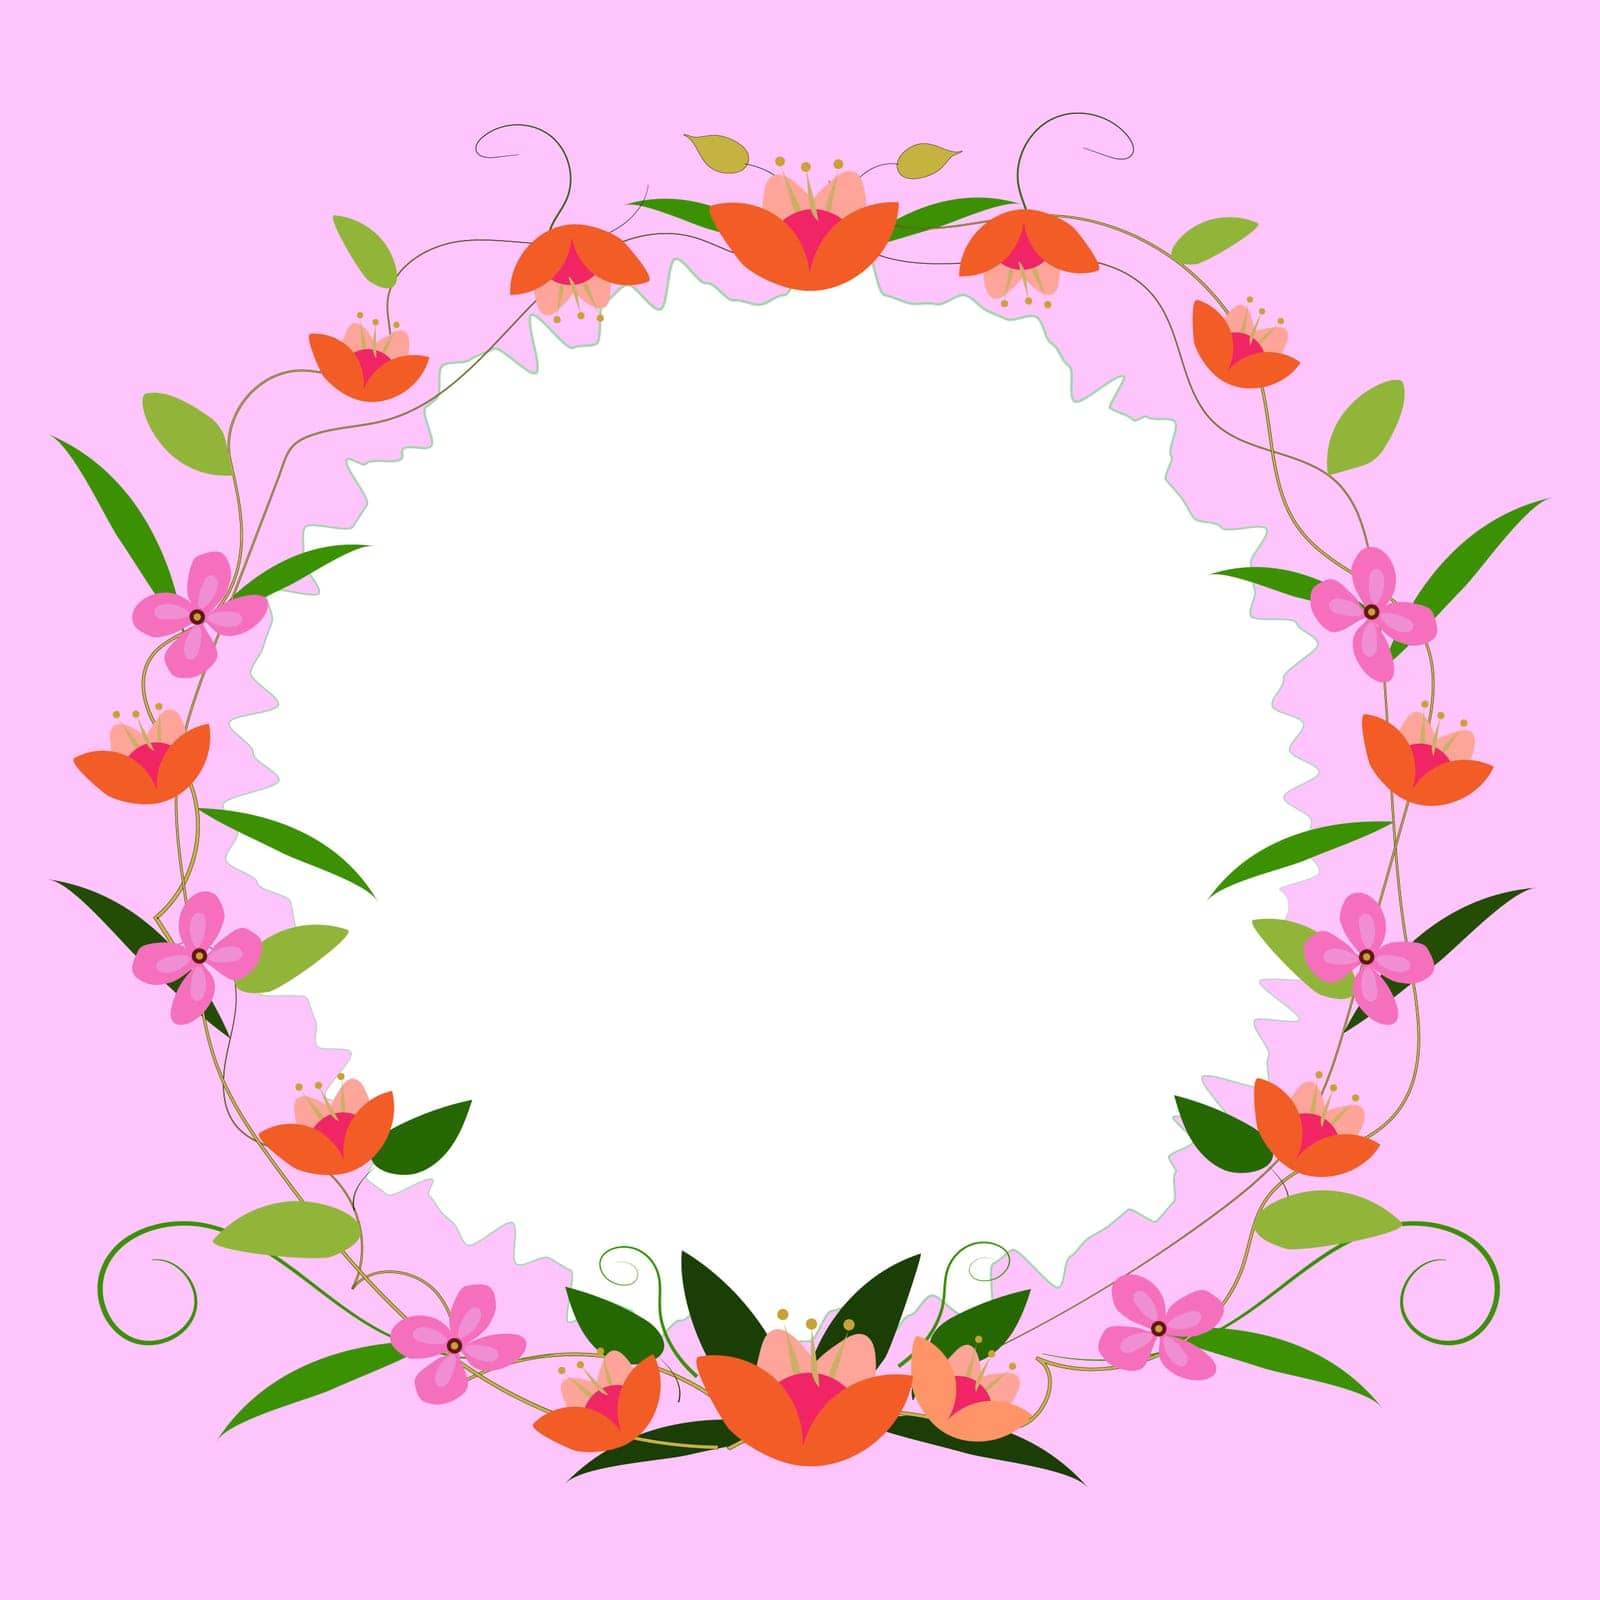 Blank pink Frame Decorated With Colorful Flowers And Foliage Arranged Harmoniously. Empty Poster Border Surrounded By Multicolored Bouquet Organized Pleasantly. by nialowwa